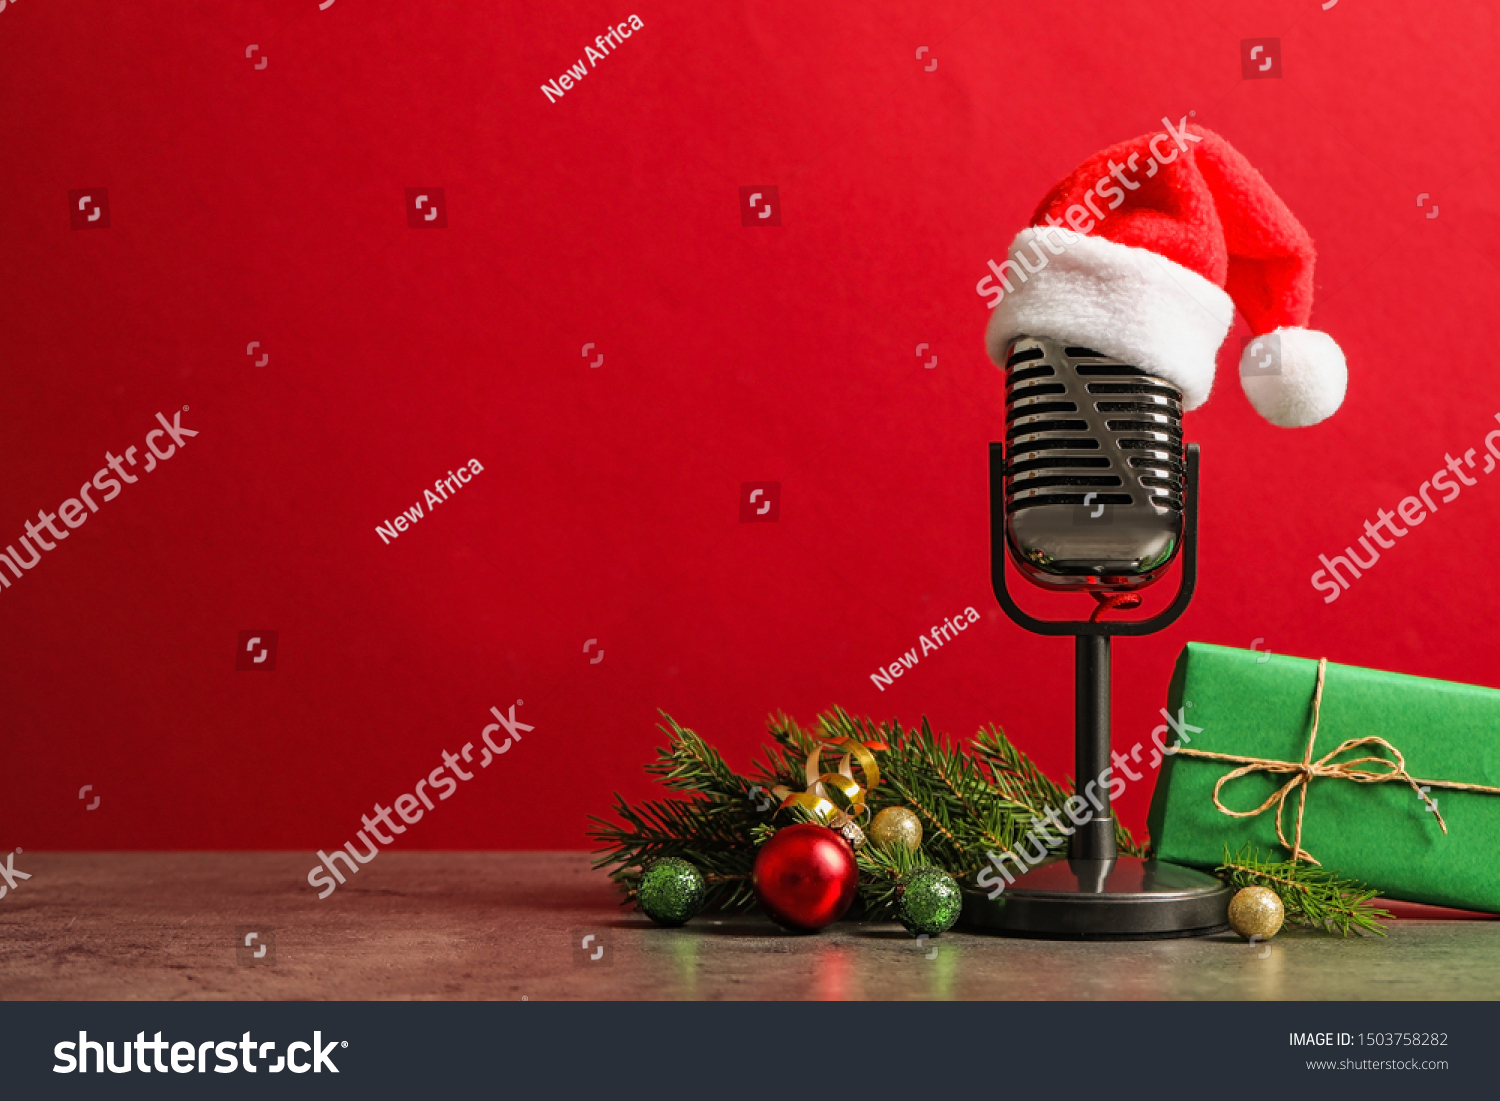 Microphone with Santa hat and decorations on grey table against red background, space for text. Christmas music #1503758282